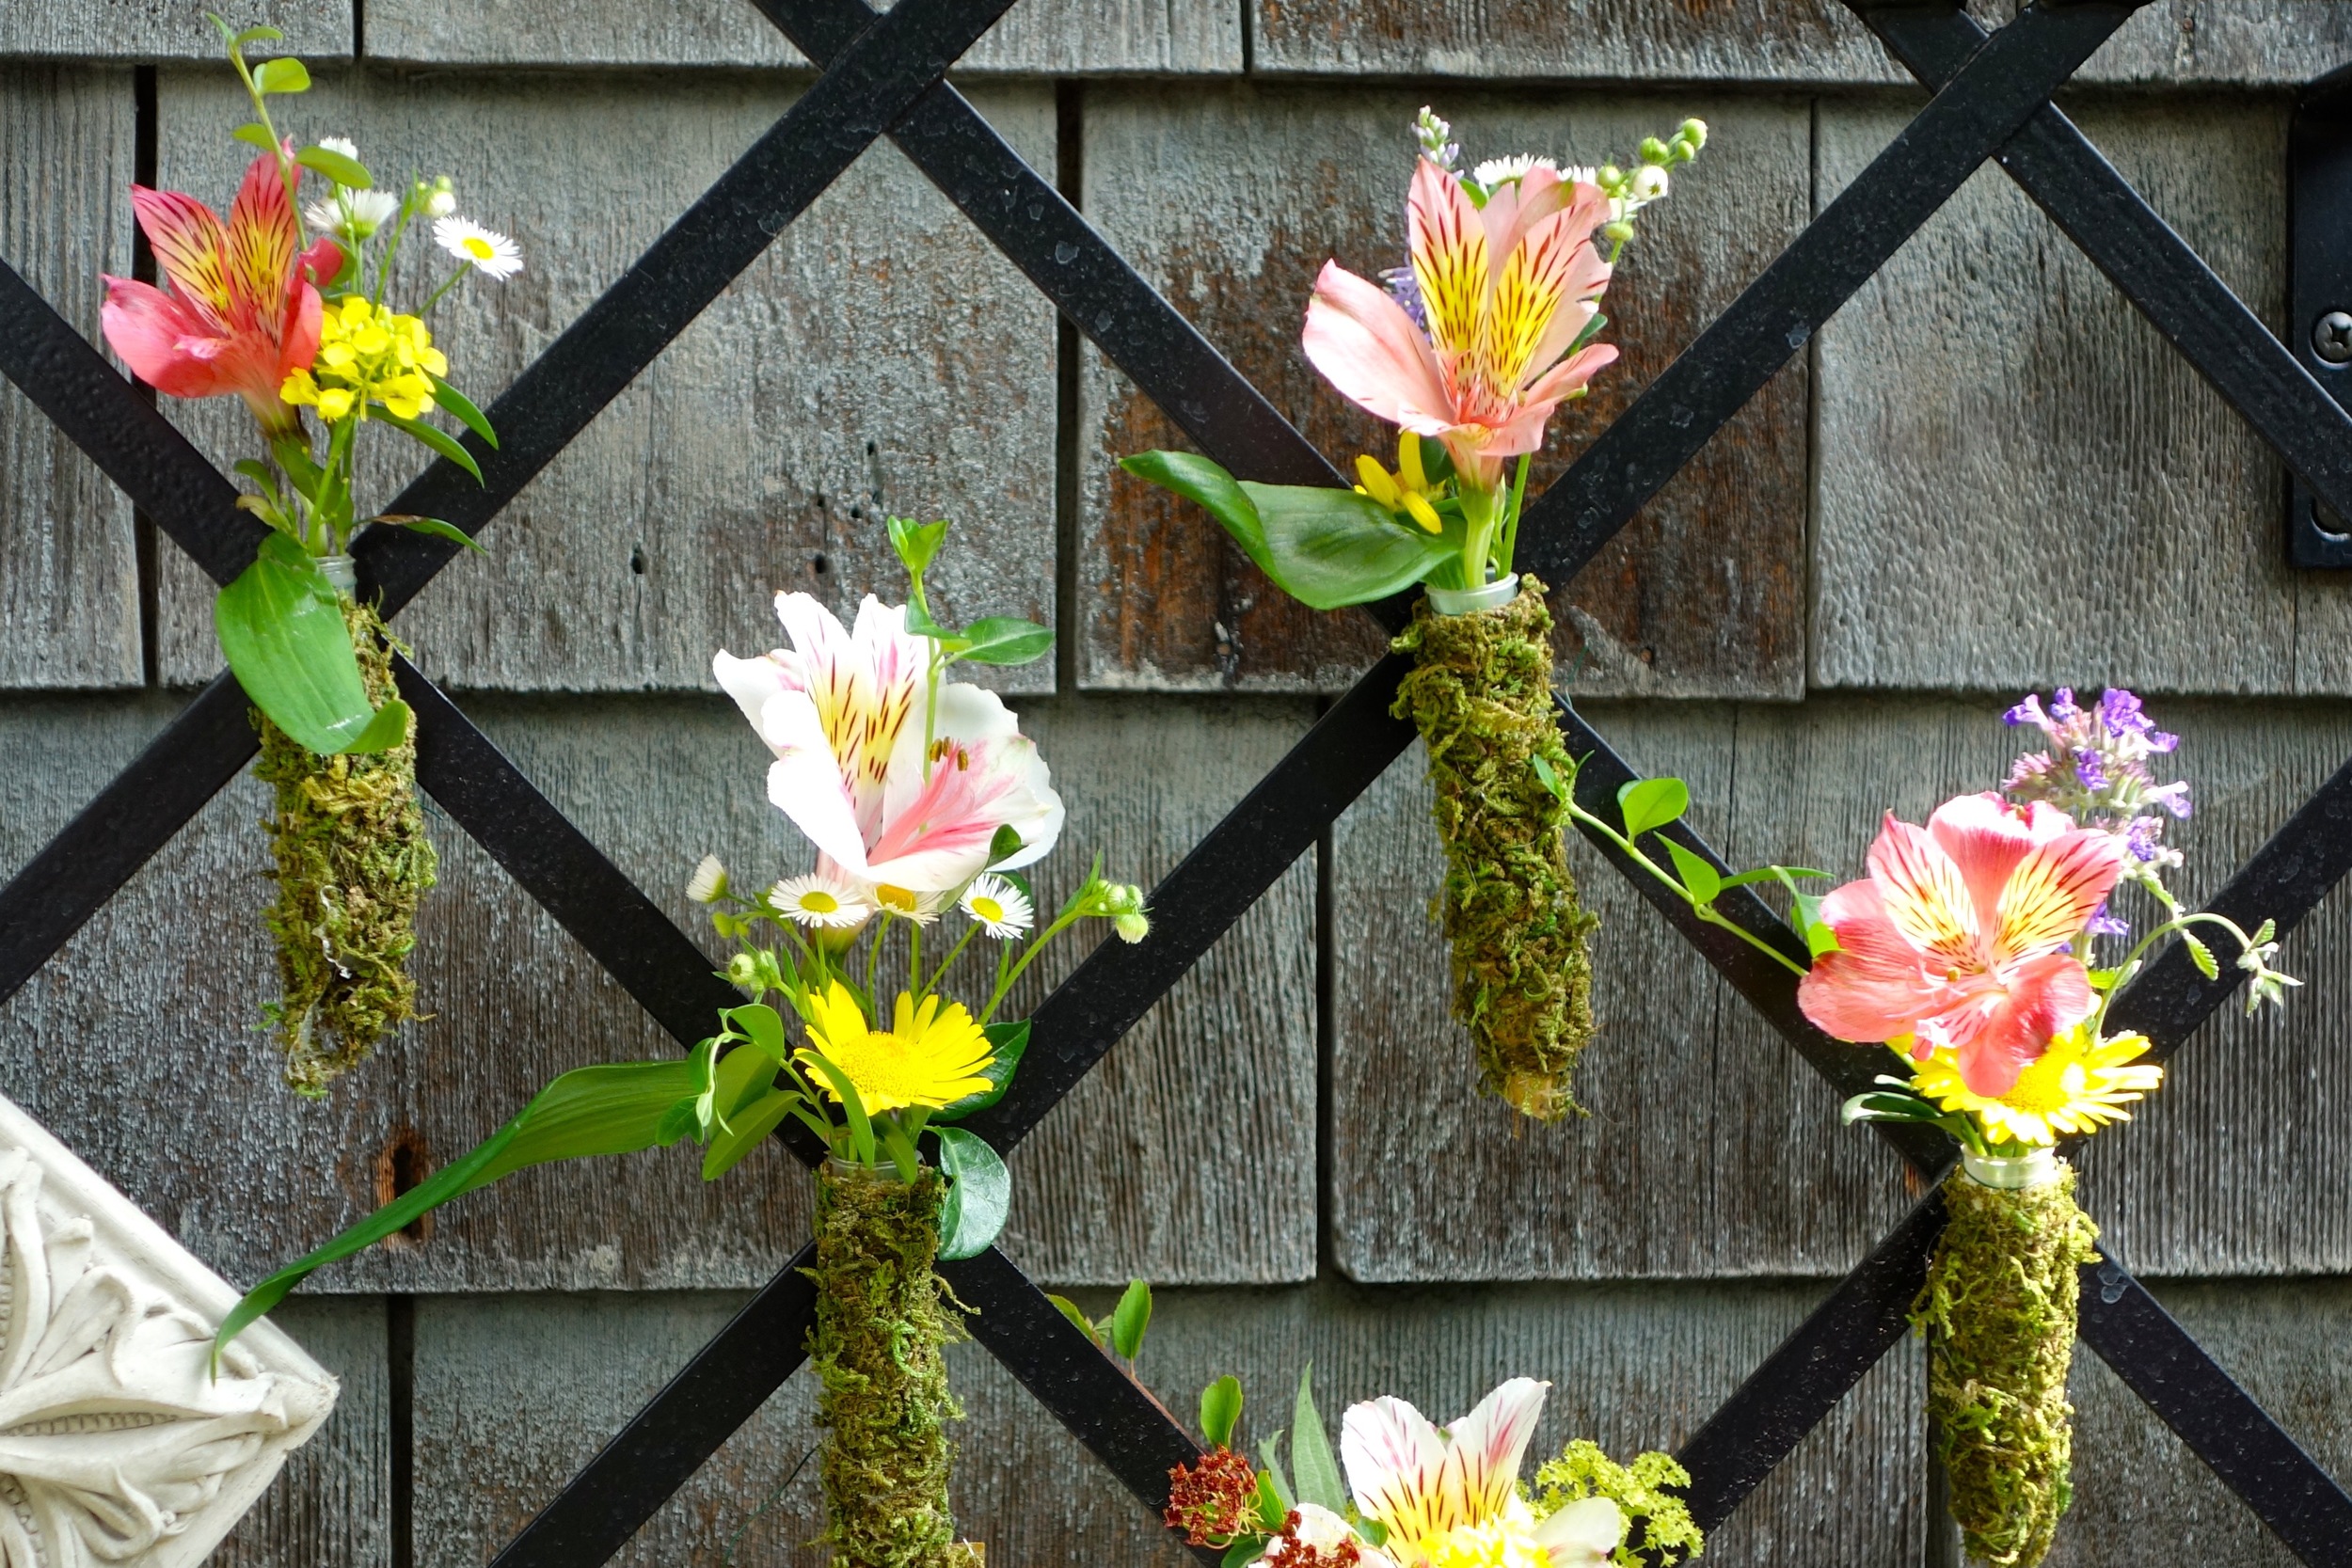   Mini bouquets including flowers from the garden adorn the trellis in the Belgian block garden.    